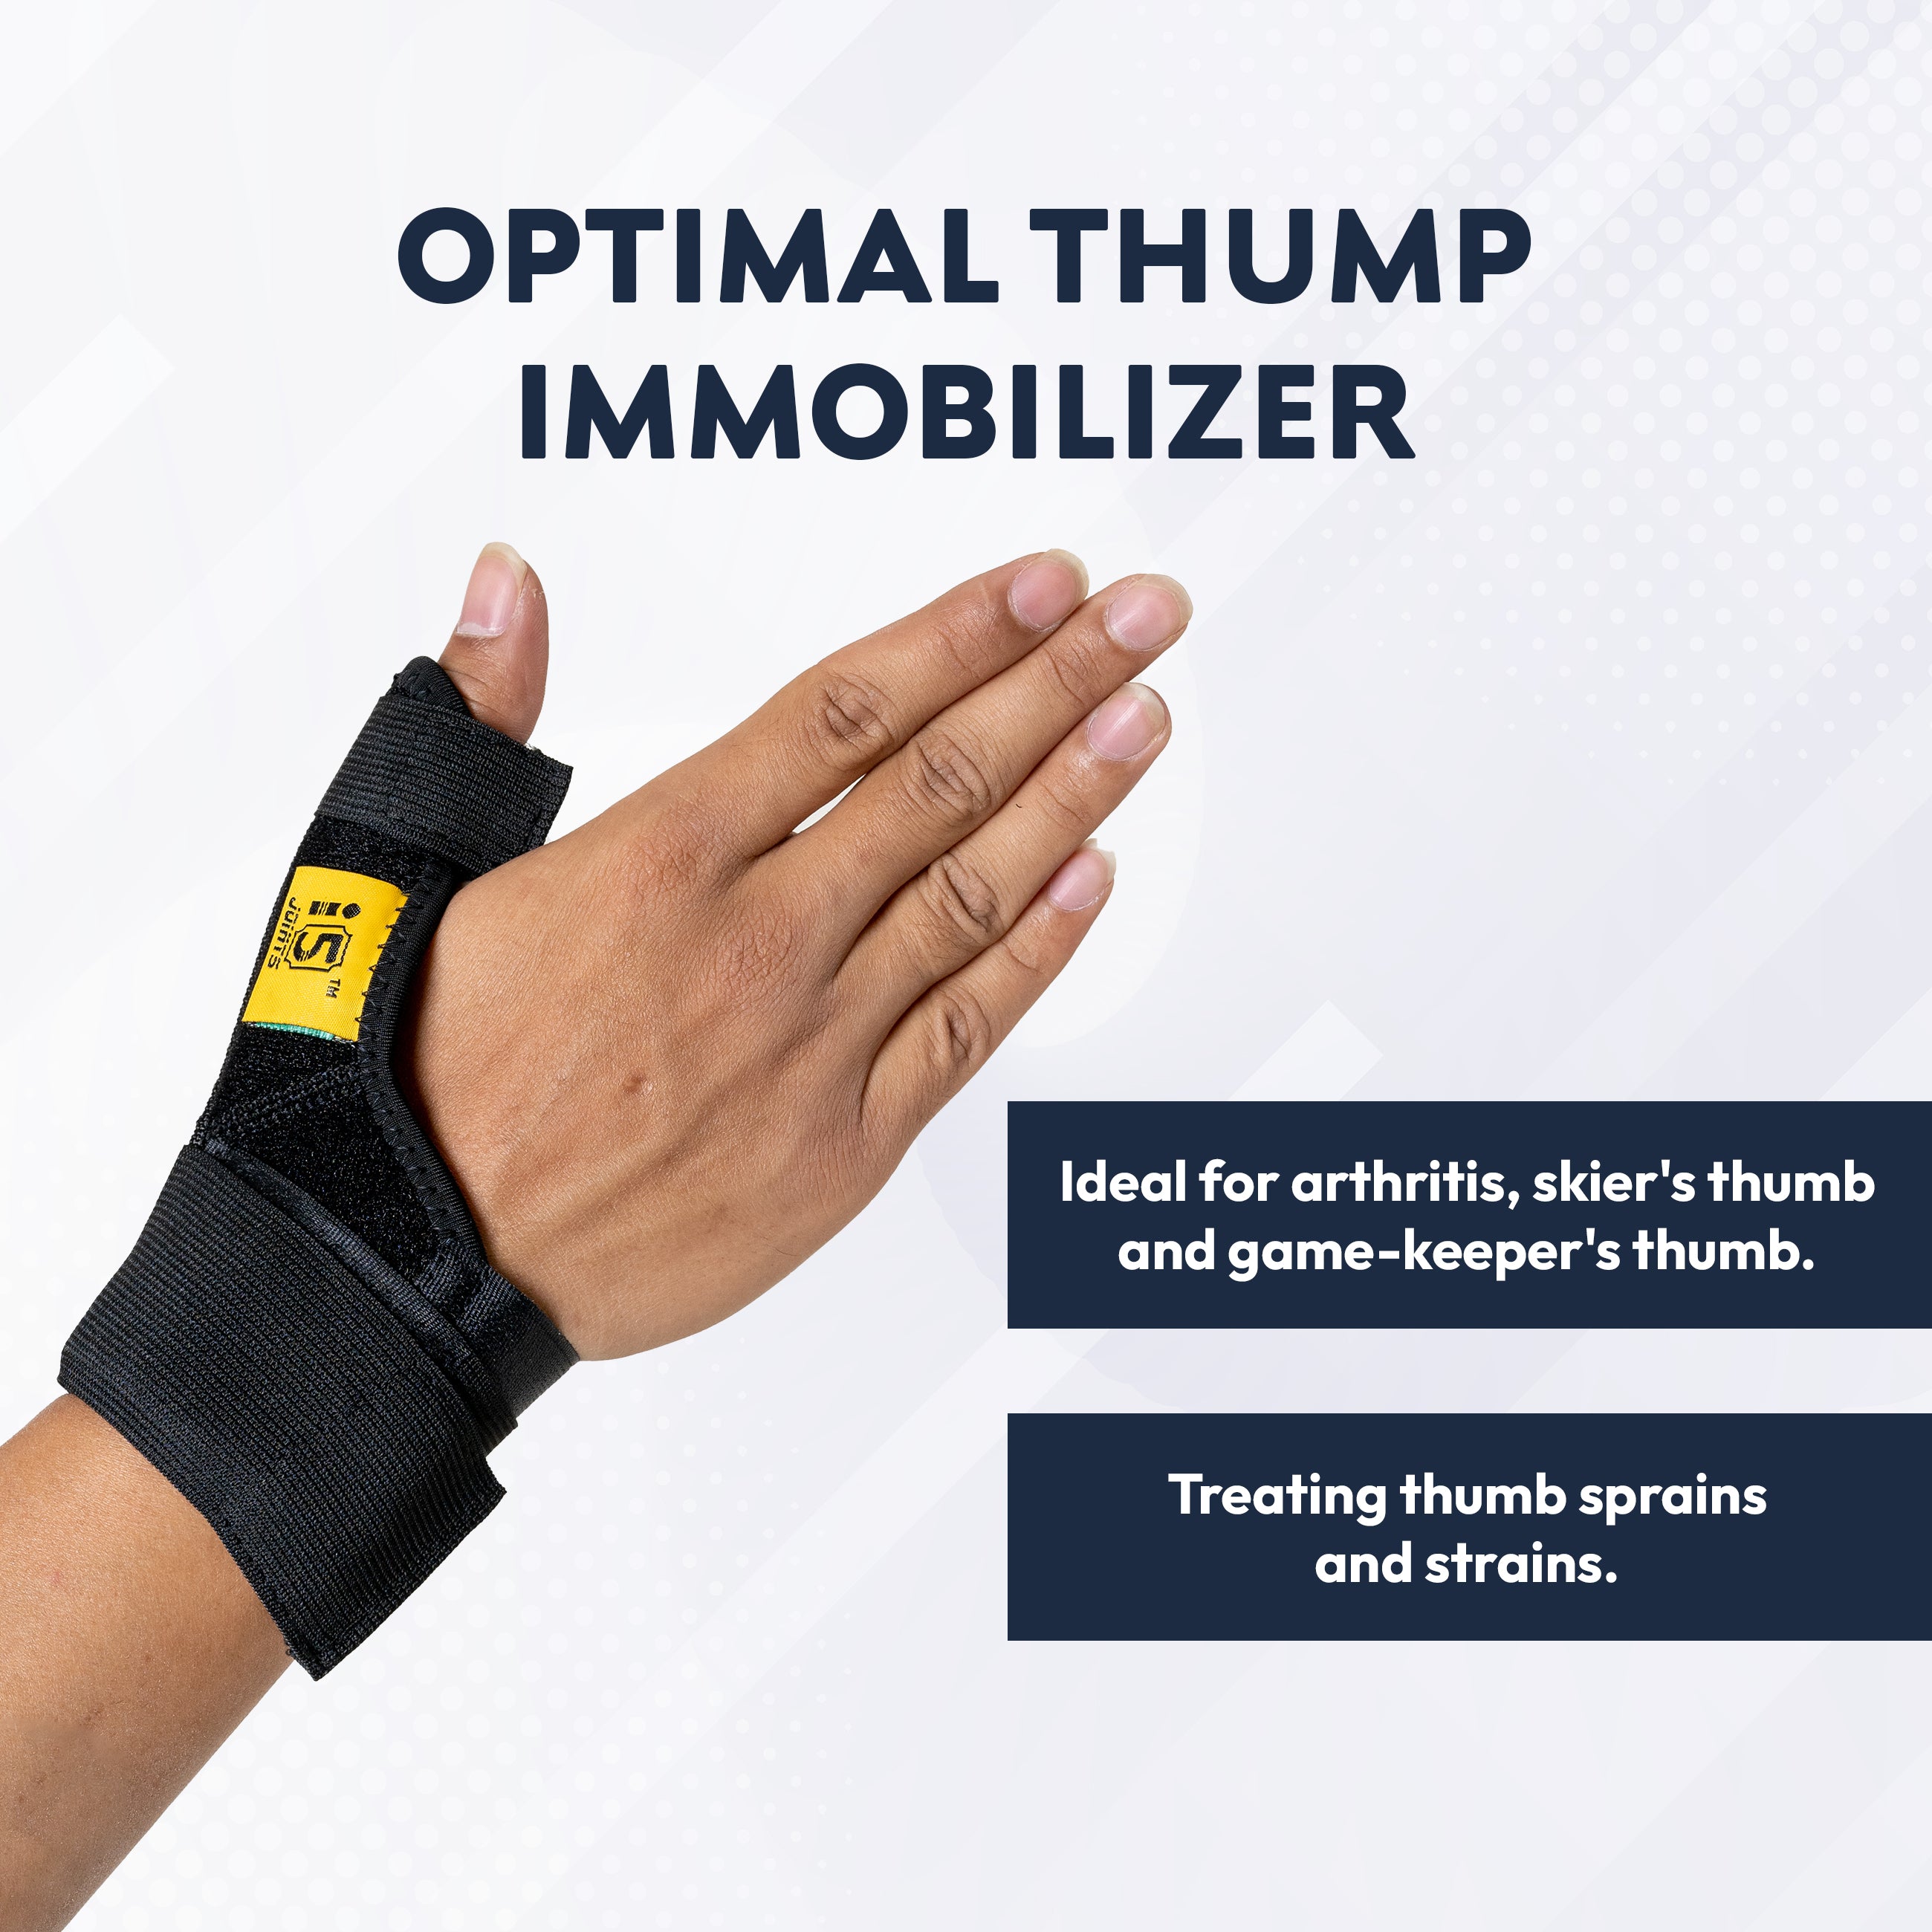 I5Joints – Thumb Splint Protector(I5JointsThumb Splint Support for Right/Left Hands,Carpal Tunnel & Trigger – Thumb Support for Pain Relief with Wrist Wrap|Thumb Brace, Allows Hand Movements)